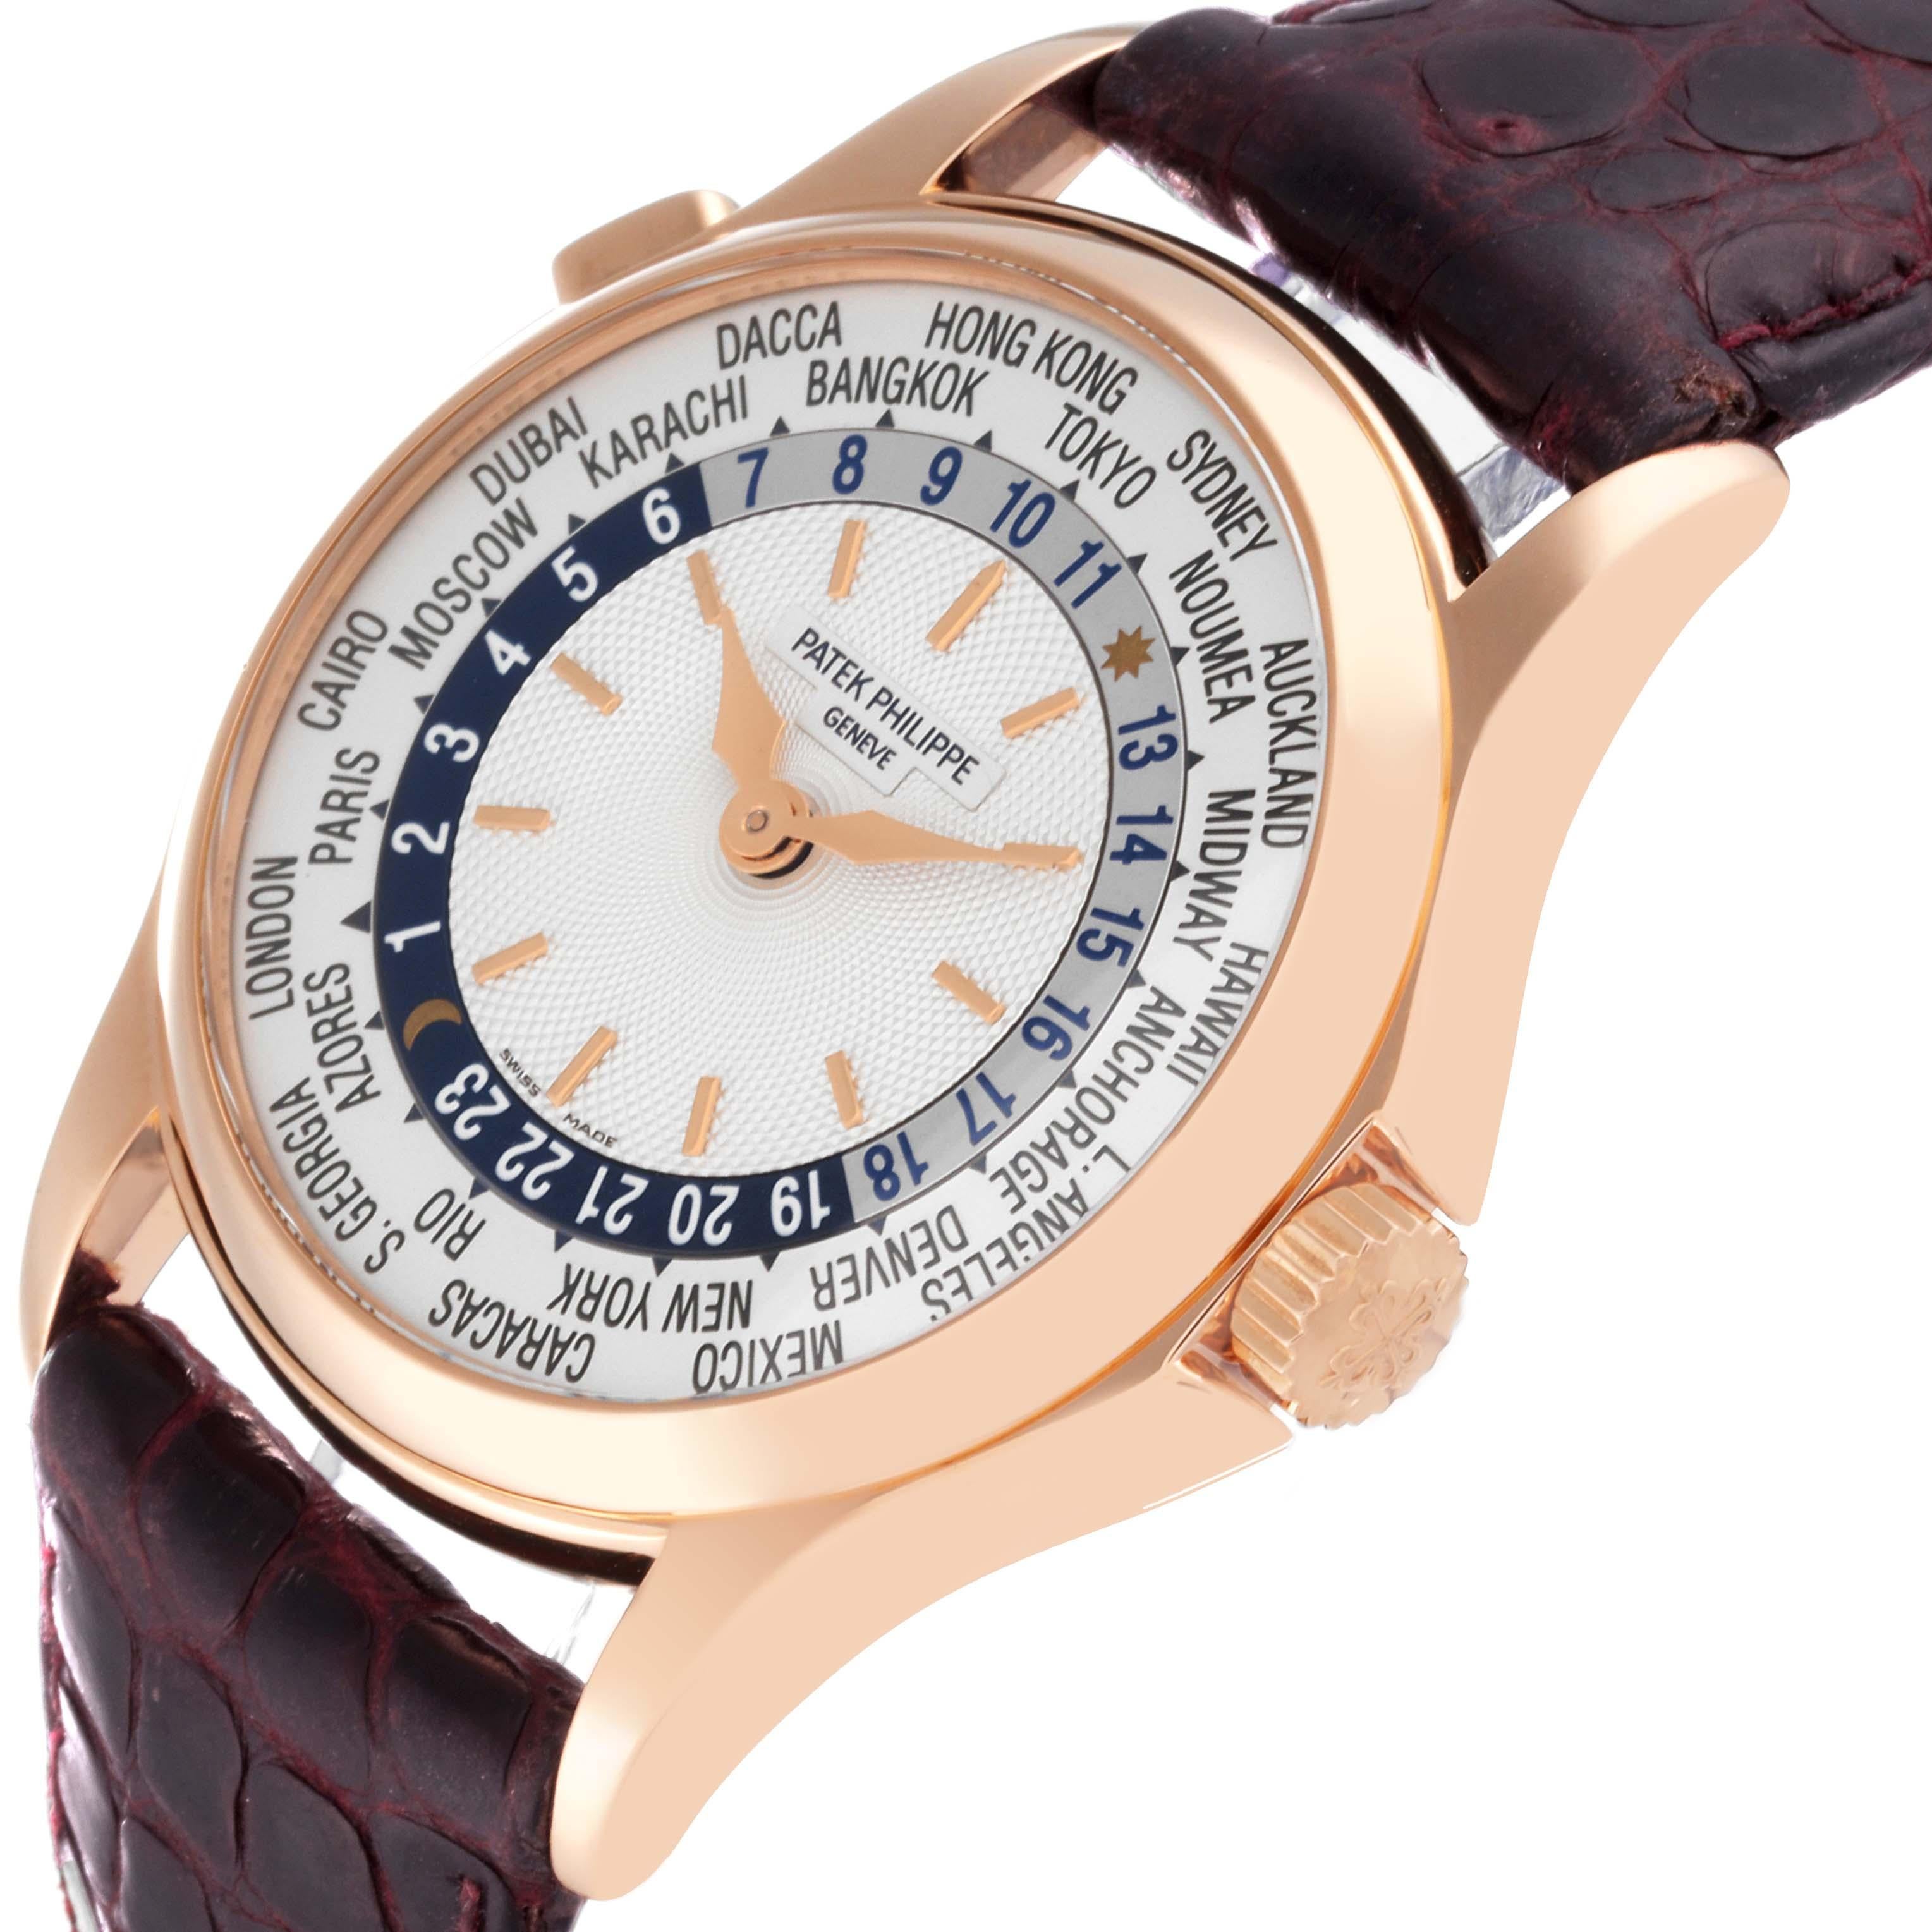 Patek Philippe World Time Automatic Silver Dial Rose Gold Mens Watch 5110 In Good Condition For Sale In Atlanta, GA